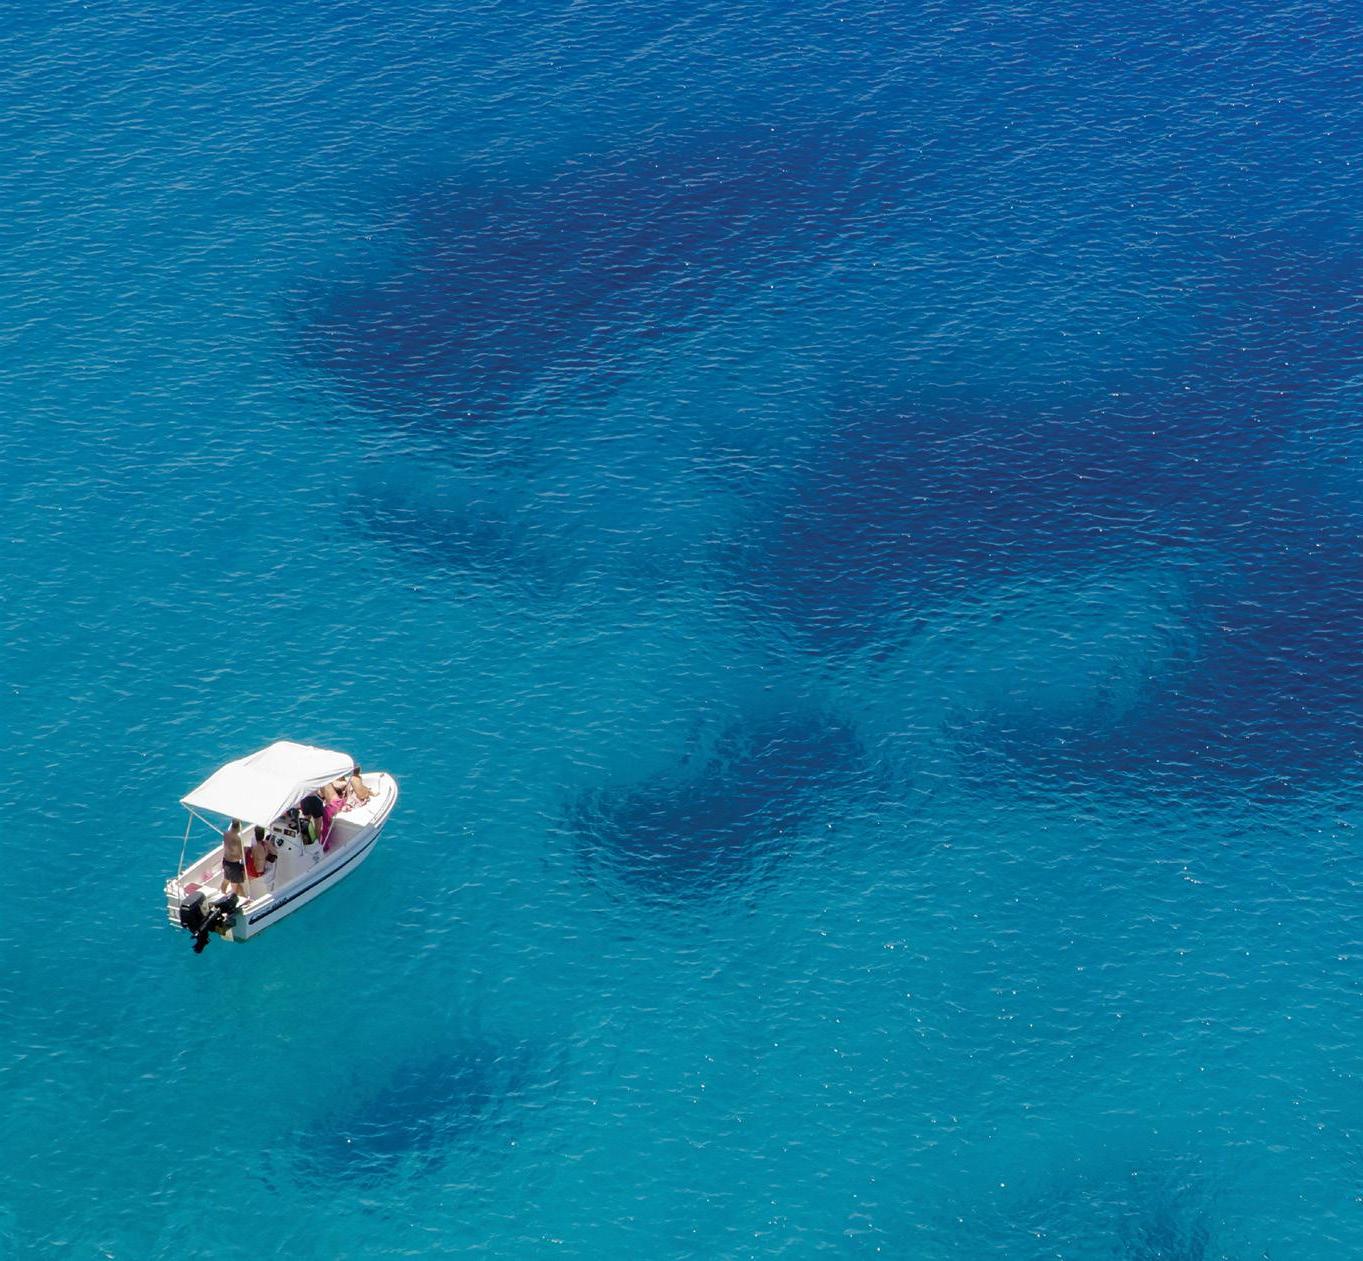 Boat floating in the middle of the Mediterranean Sea